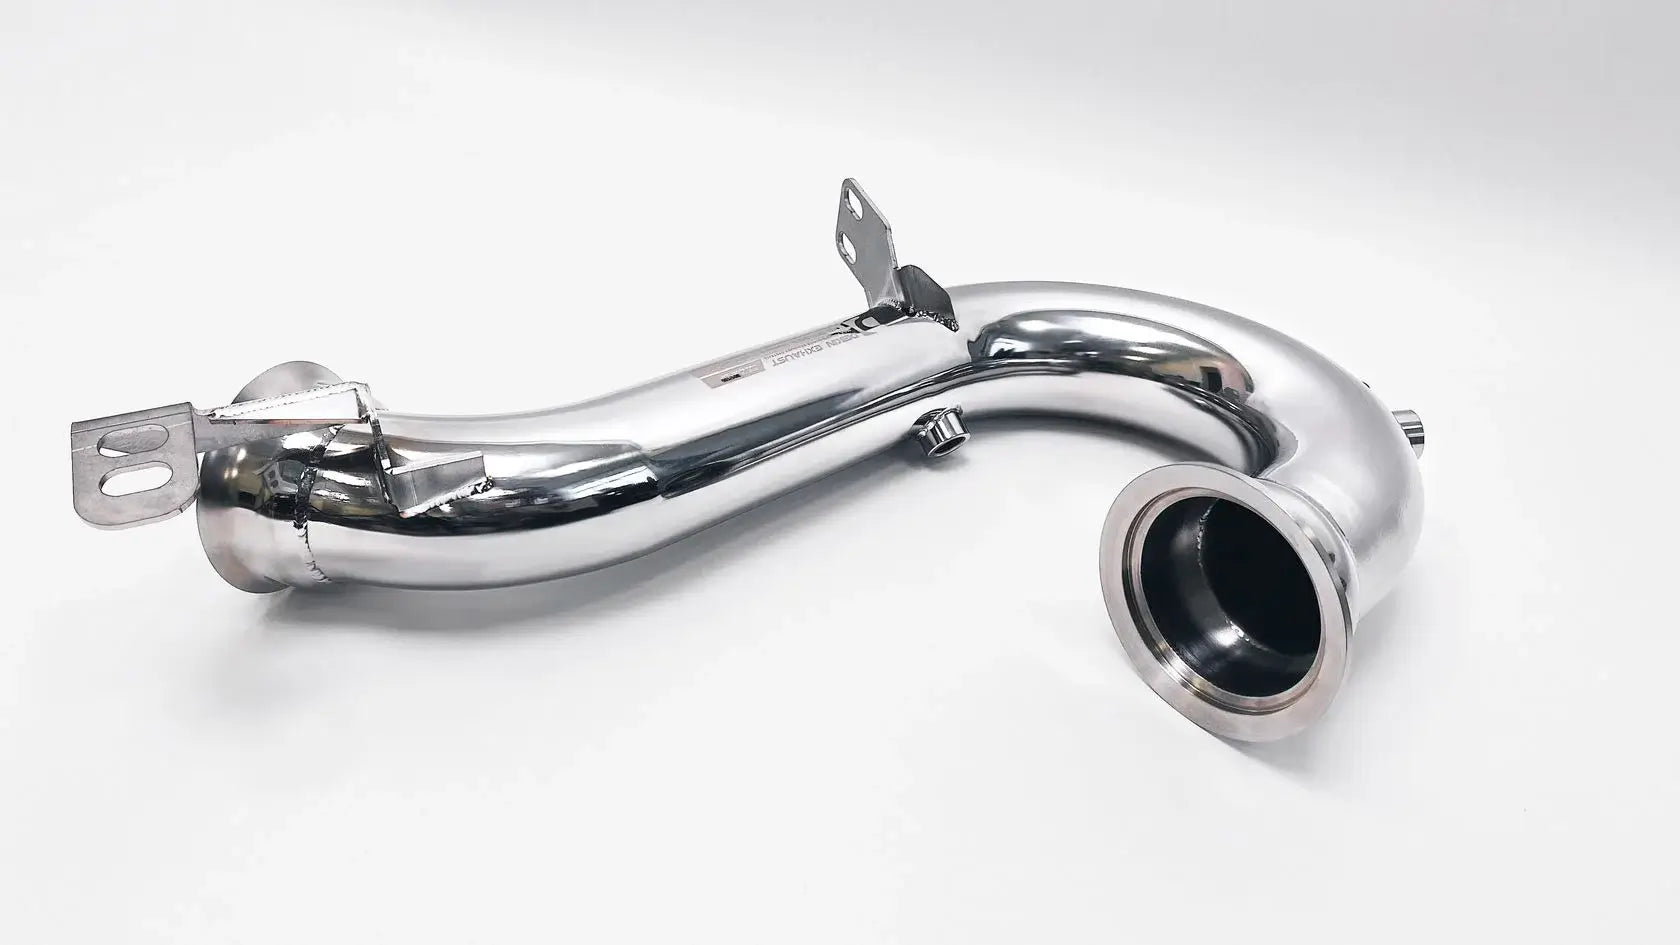 DEIKIN 10-MB.GLE450.V167-DPT Downpipe for Mercedes-AMG GLE450 (V167) with thermal insulation HeatShield Photo-0 